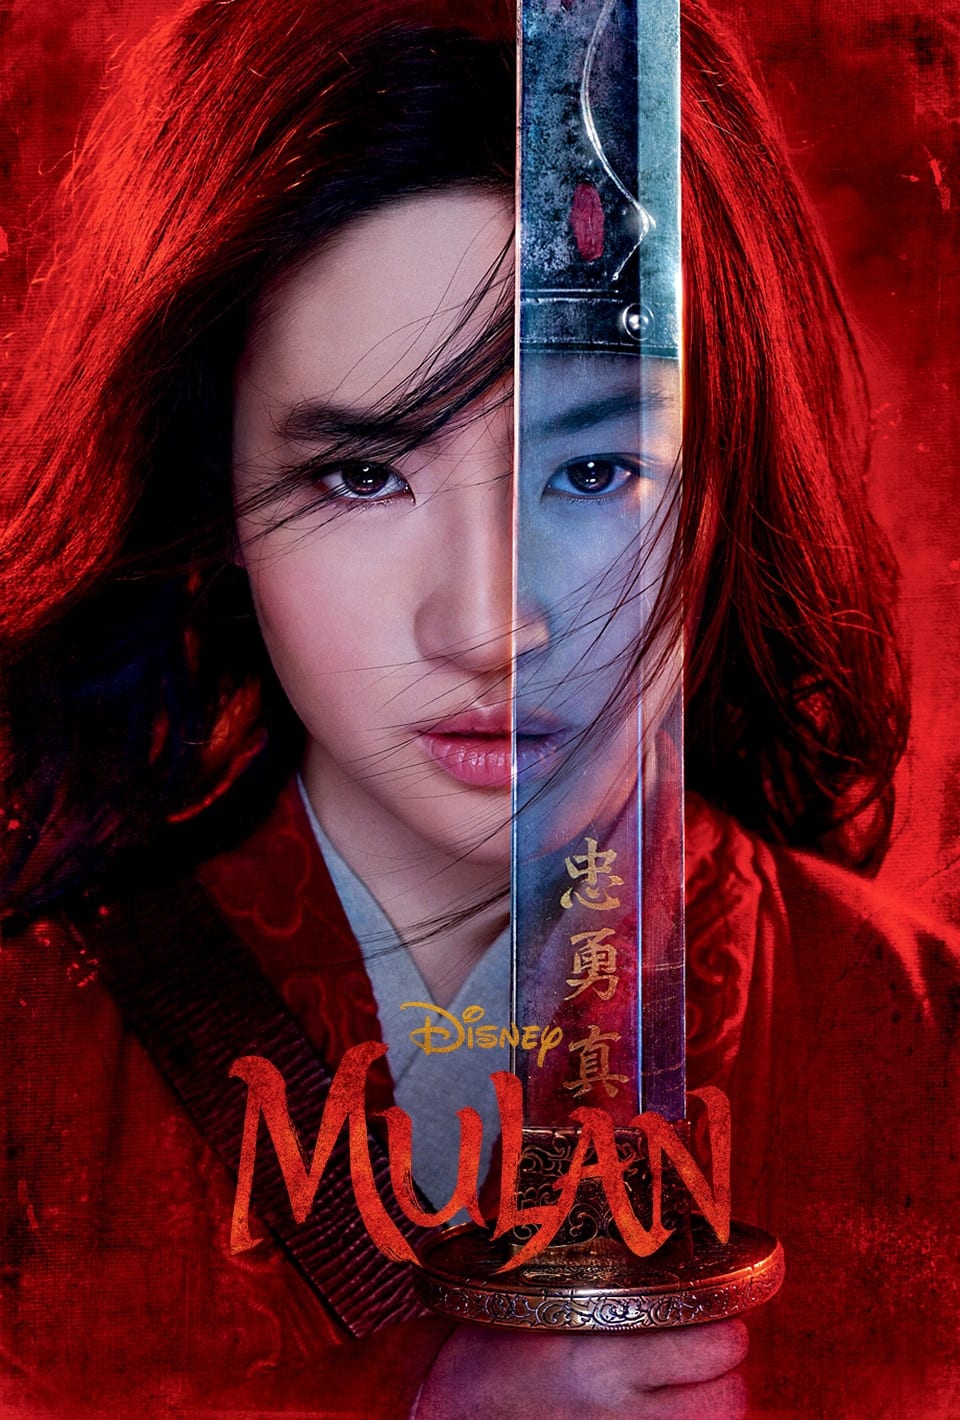 Mulan will be released on Disney+ in September at a premium price